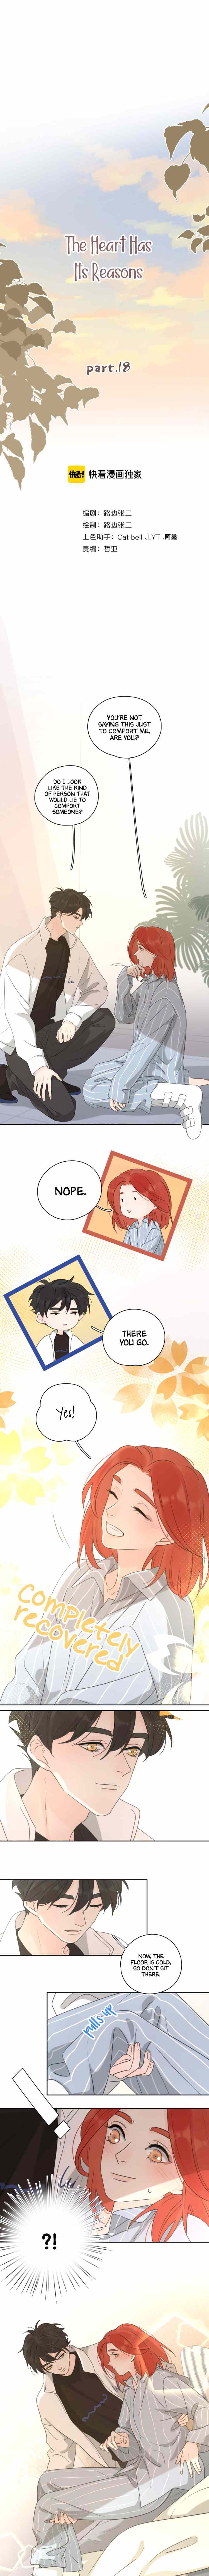 The Looks of Love: the heart has its reasons Chapter 58